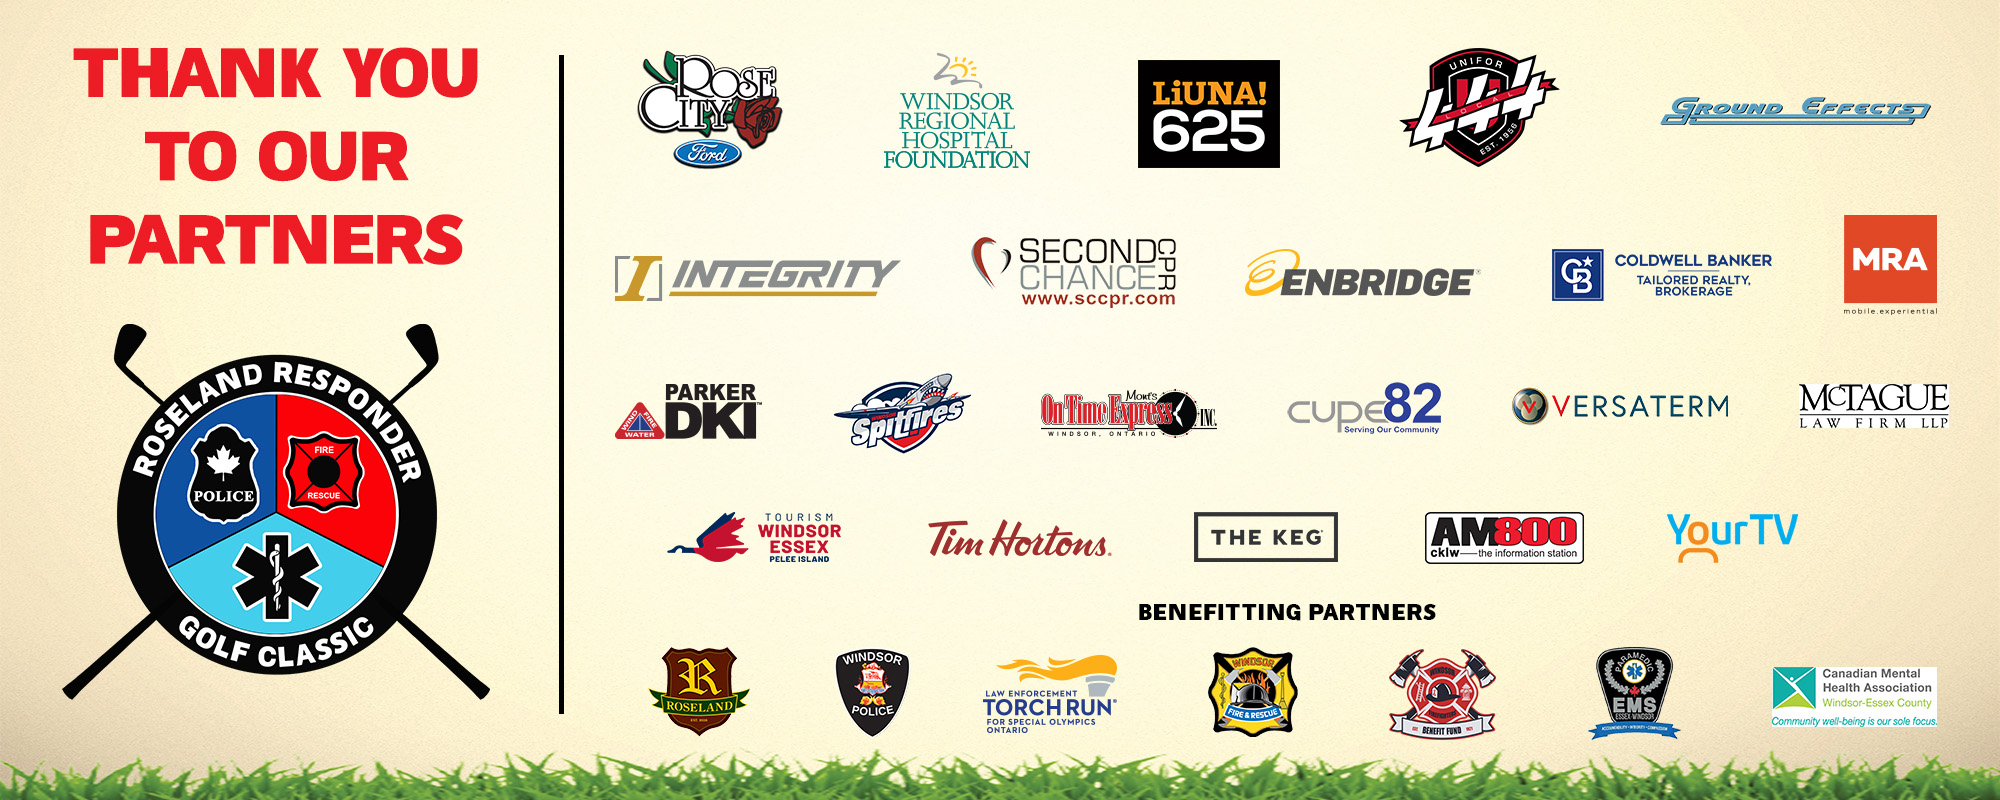 Words, Thank you to our partners with Roseland Responder Golf Classic tournament logo. Partners listed below.